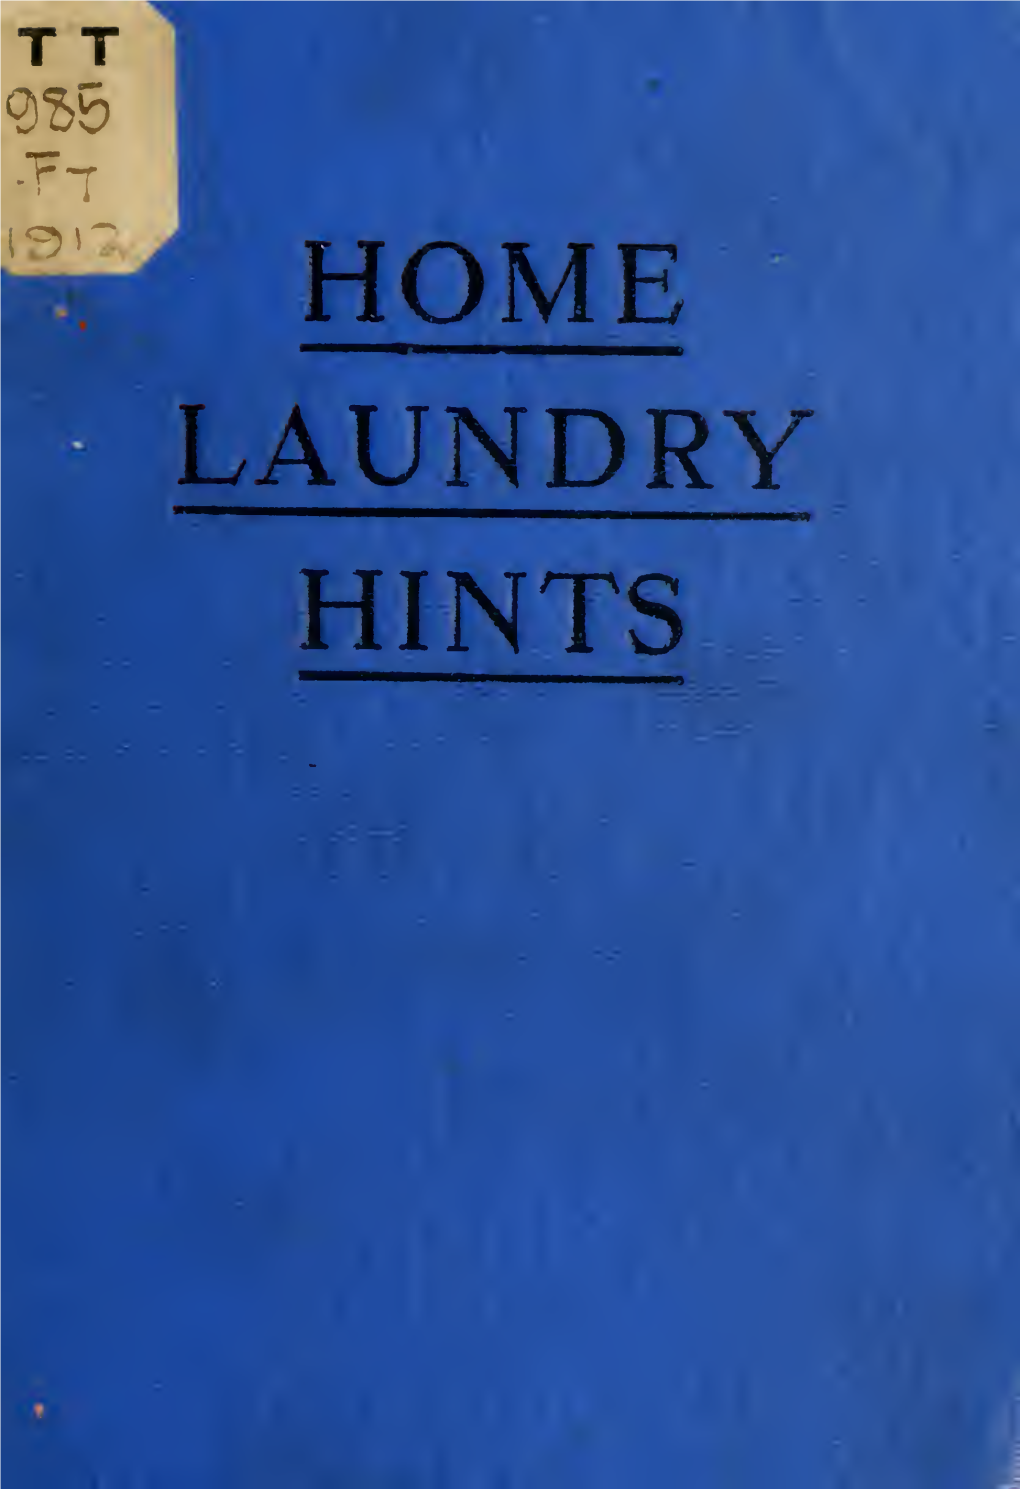 HOME LAUNDRY HINTS HOME Laundry Hints